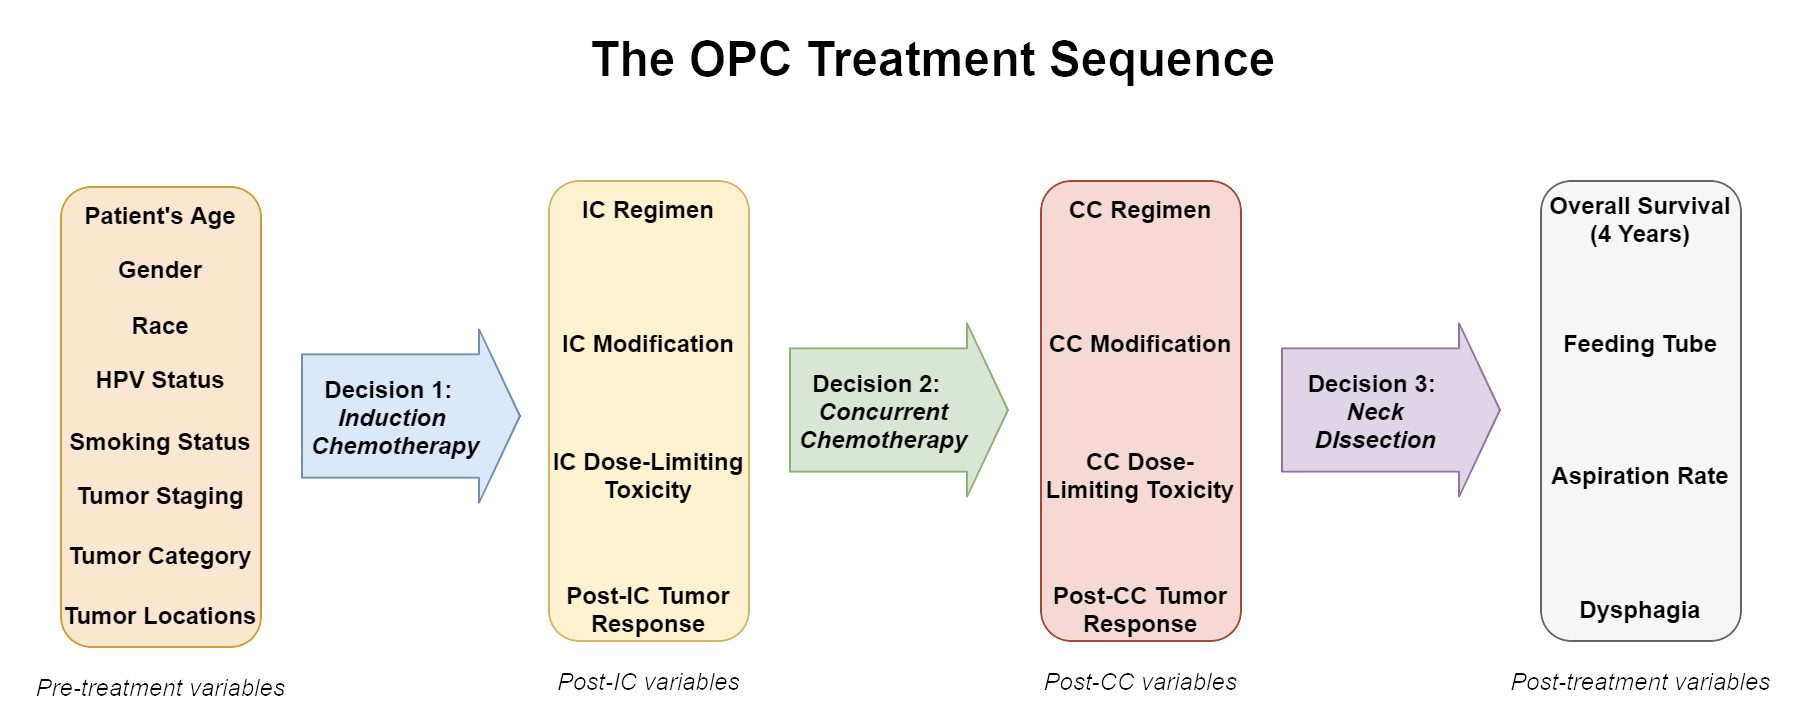 Main features, outcomes, and decisions of the OPC treatment sequence